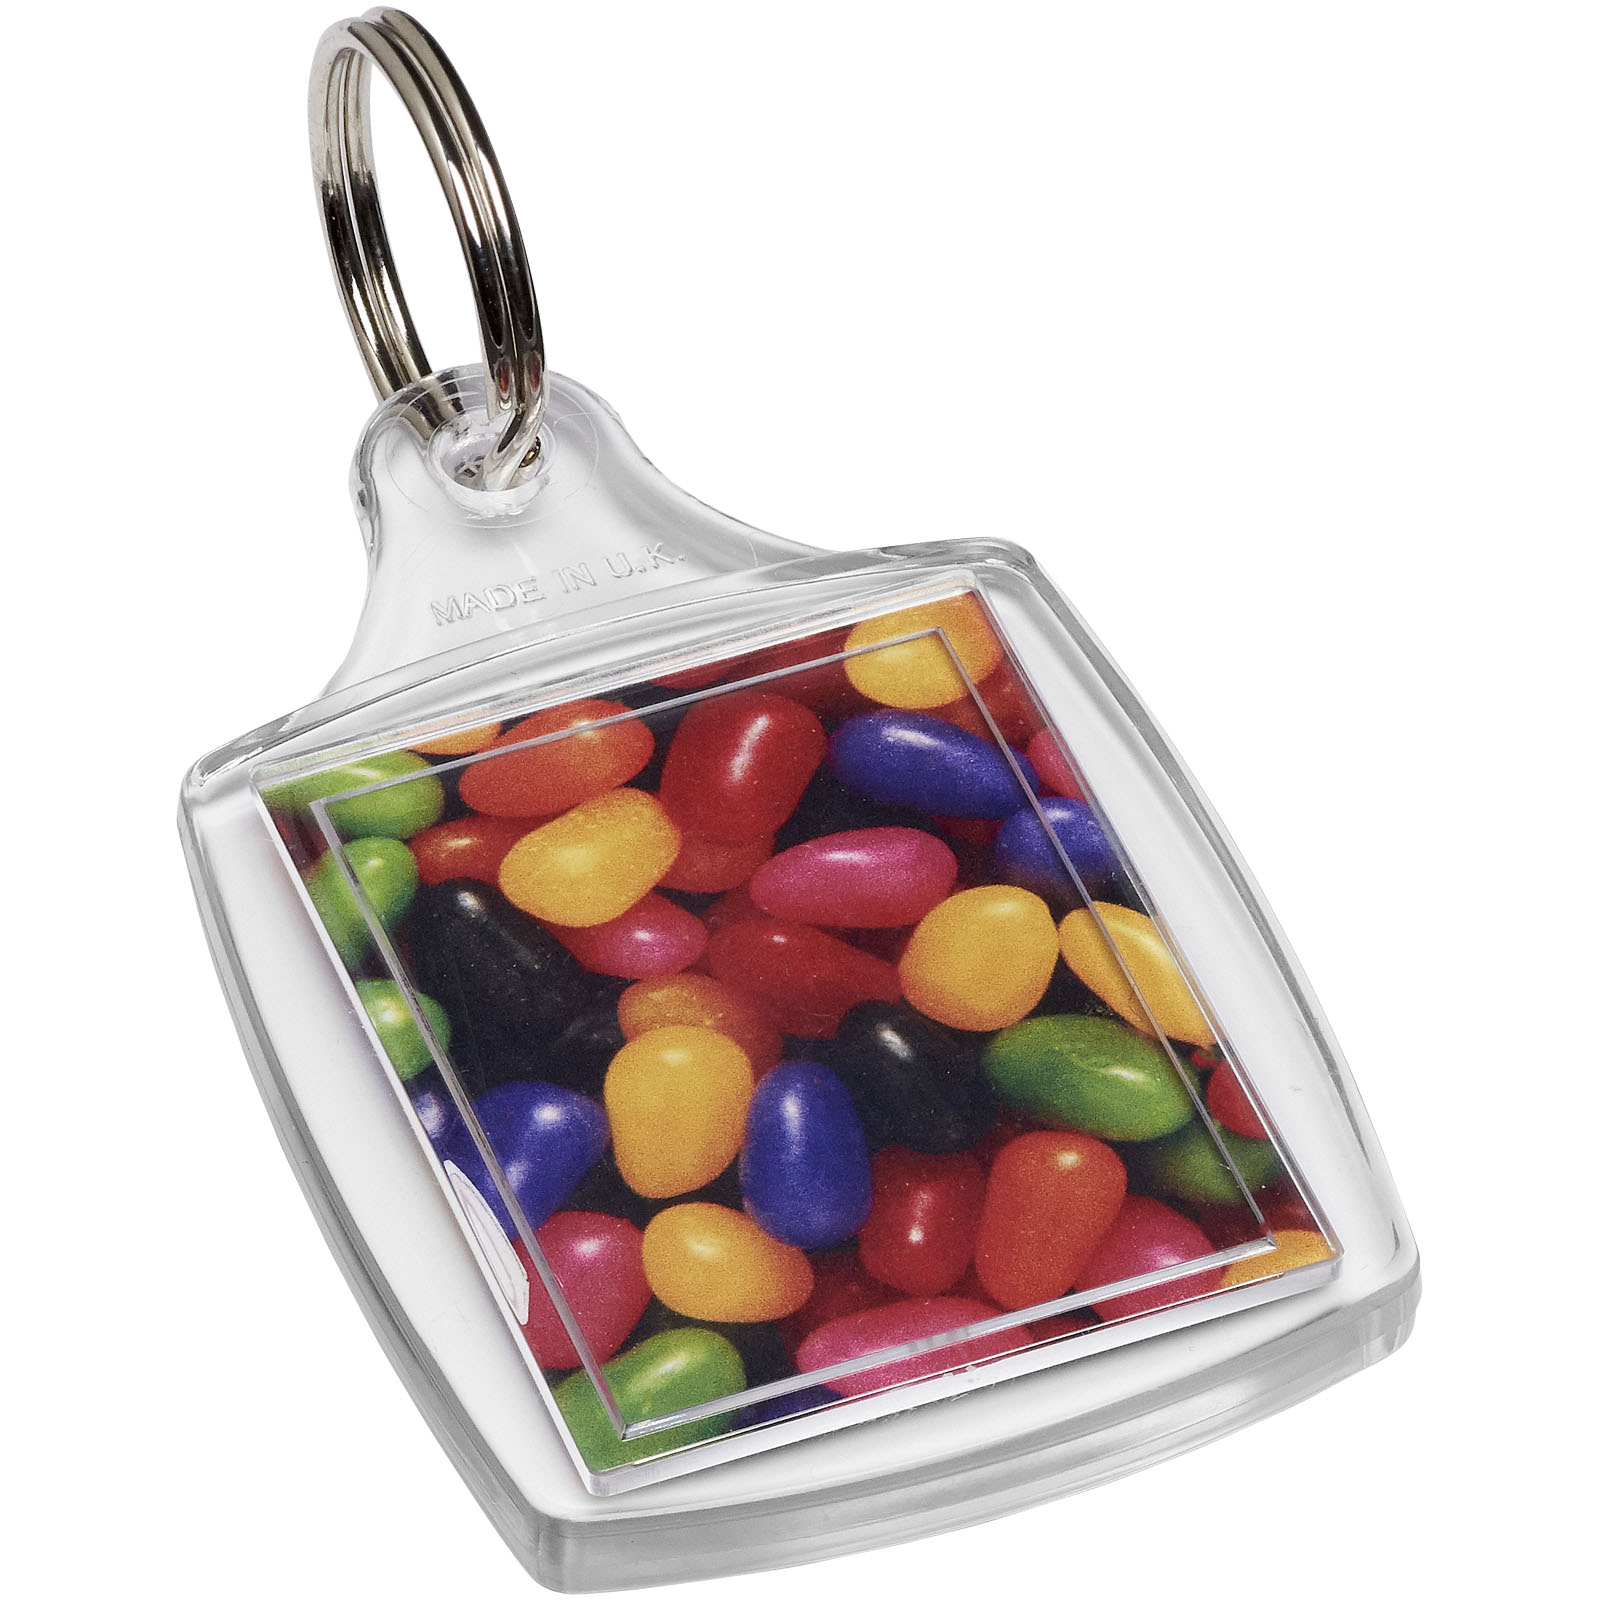 Plastic pendant ORRIS with key ring - transparent clear